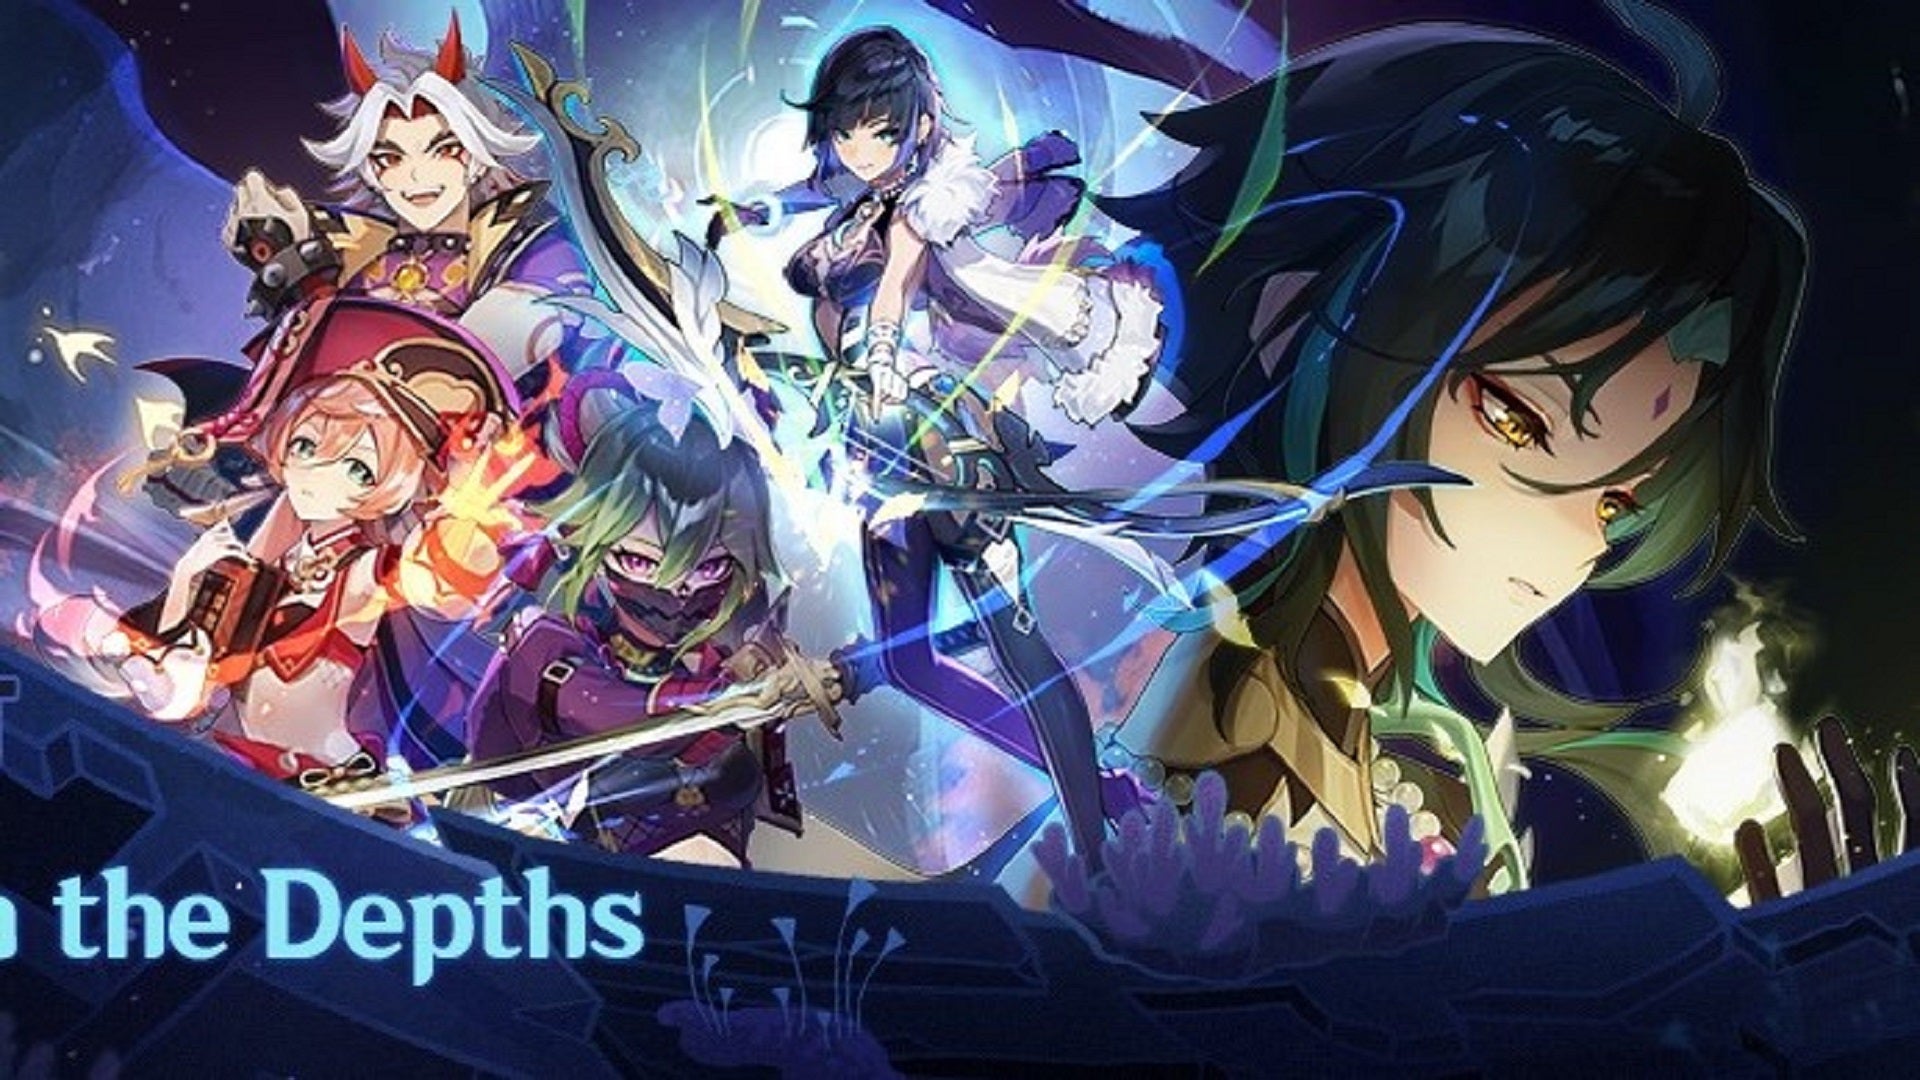 The official art header image for the 2.7 update cropped